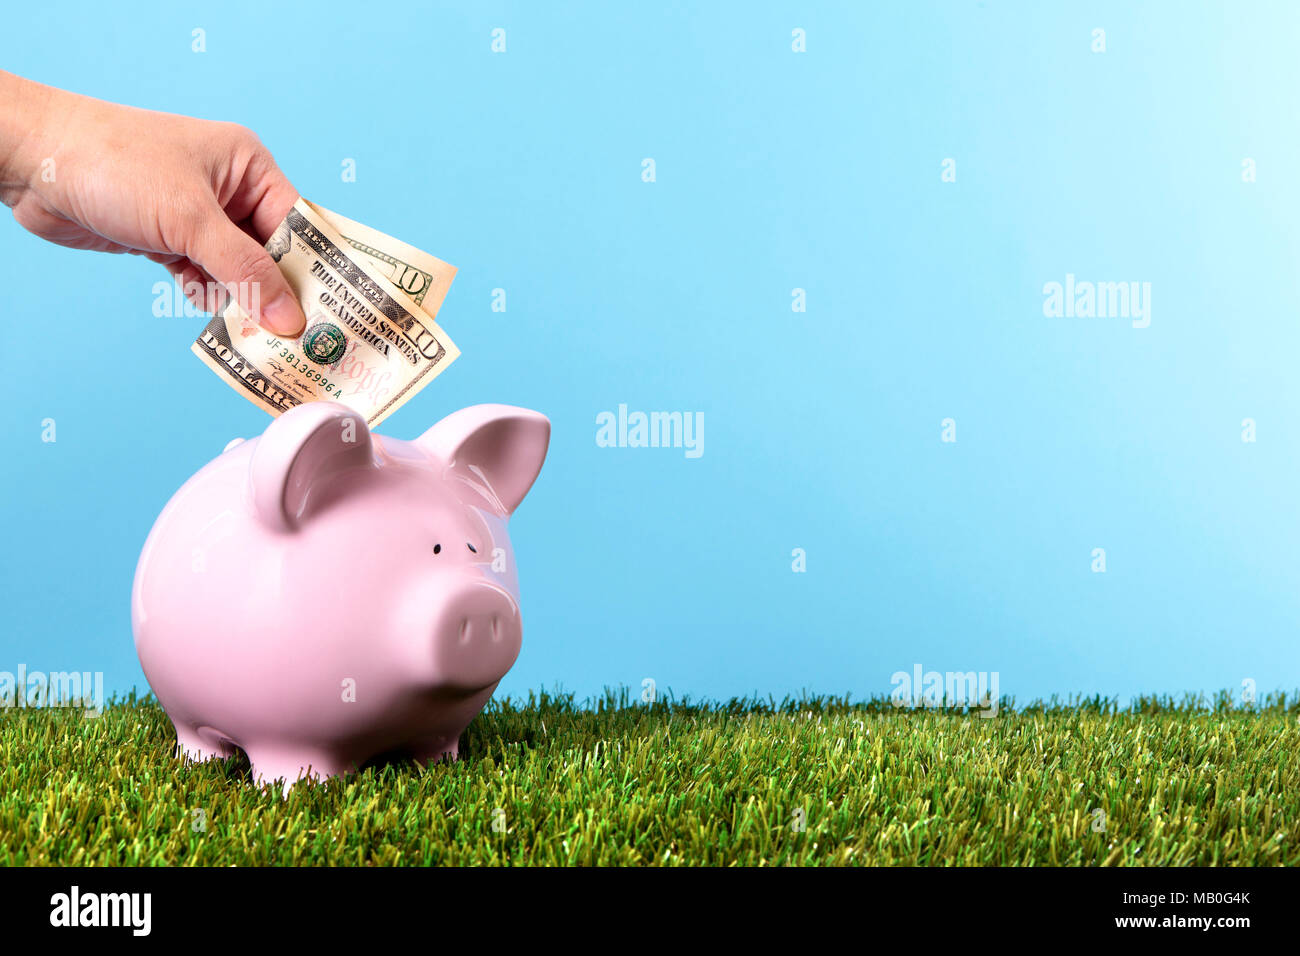 Hand putting a ten dollar bill into a pink piggy bank, with grass and blue sky Stock Photo